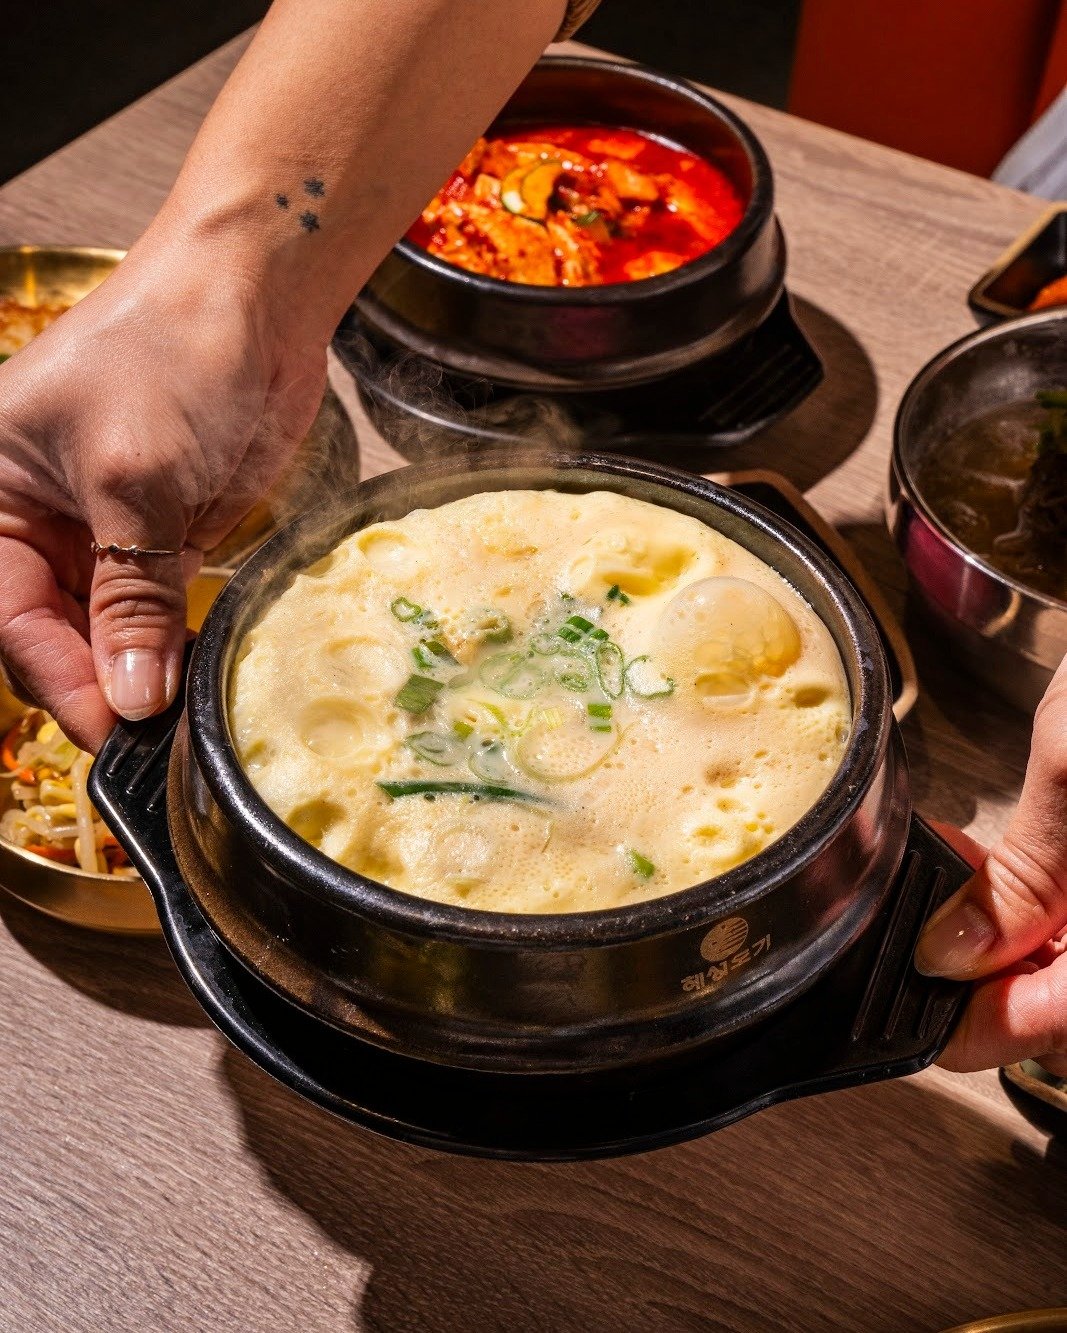 Can you name a person who doesn't like steamed egg? Eggs-actly... you can't. 🙃🍳

#88qkbbq #koreanfood #koreancuisine #banchan #koreanbbq #meatlover #rowlandheights #steamedegg